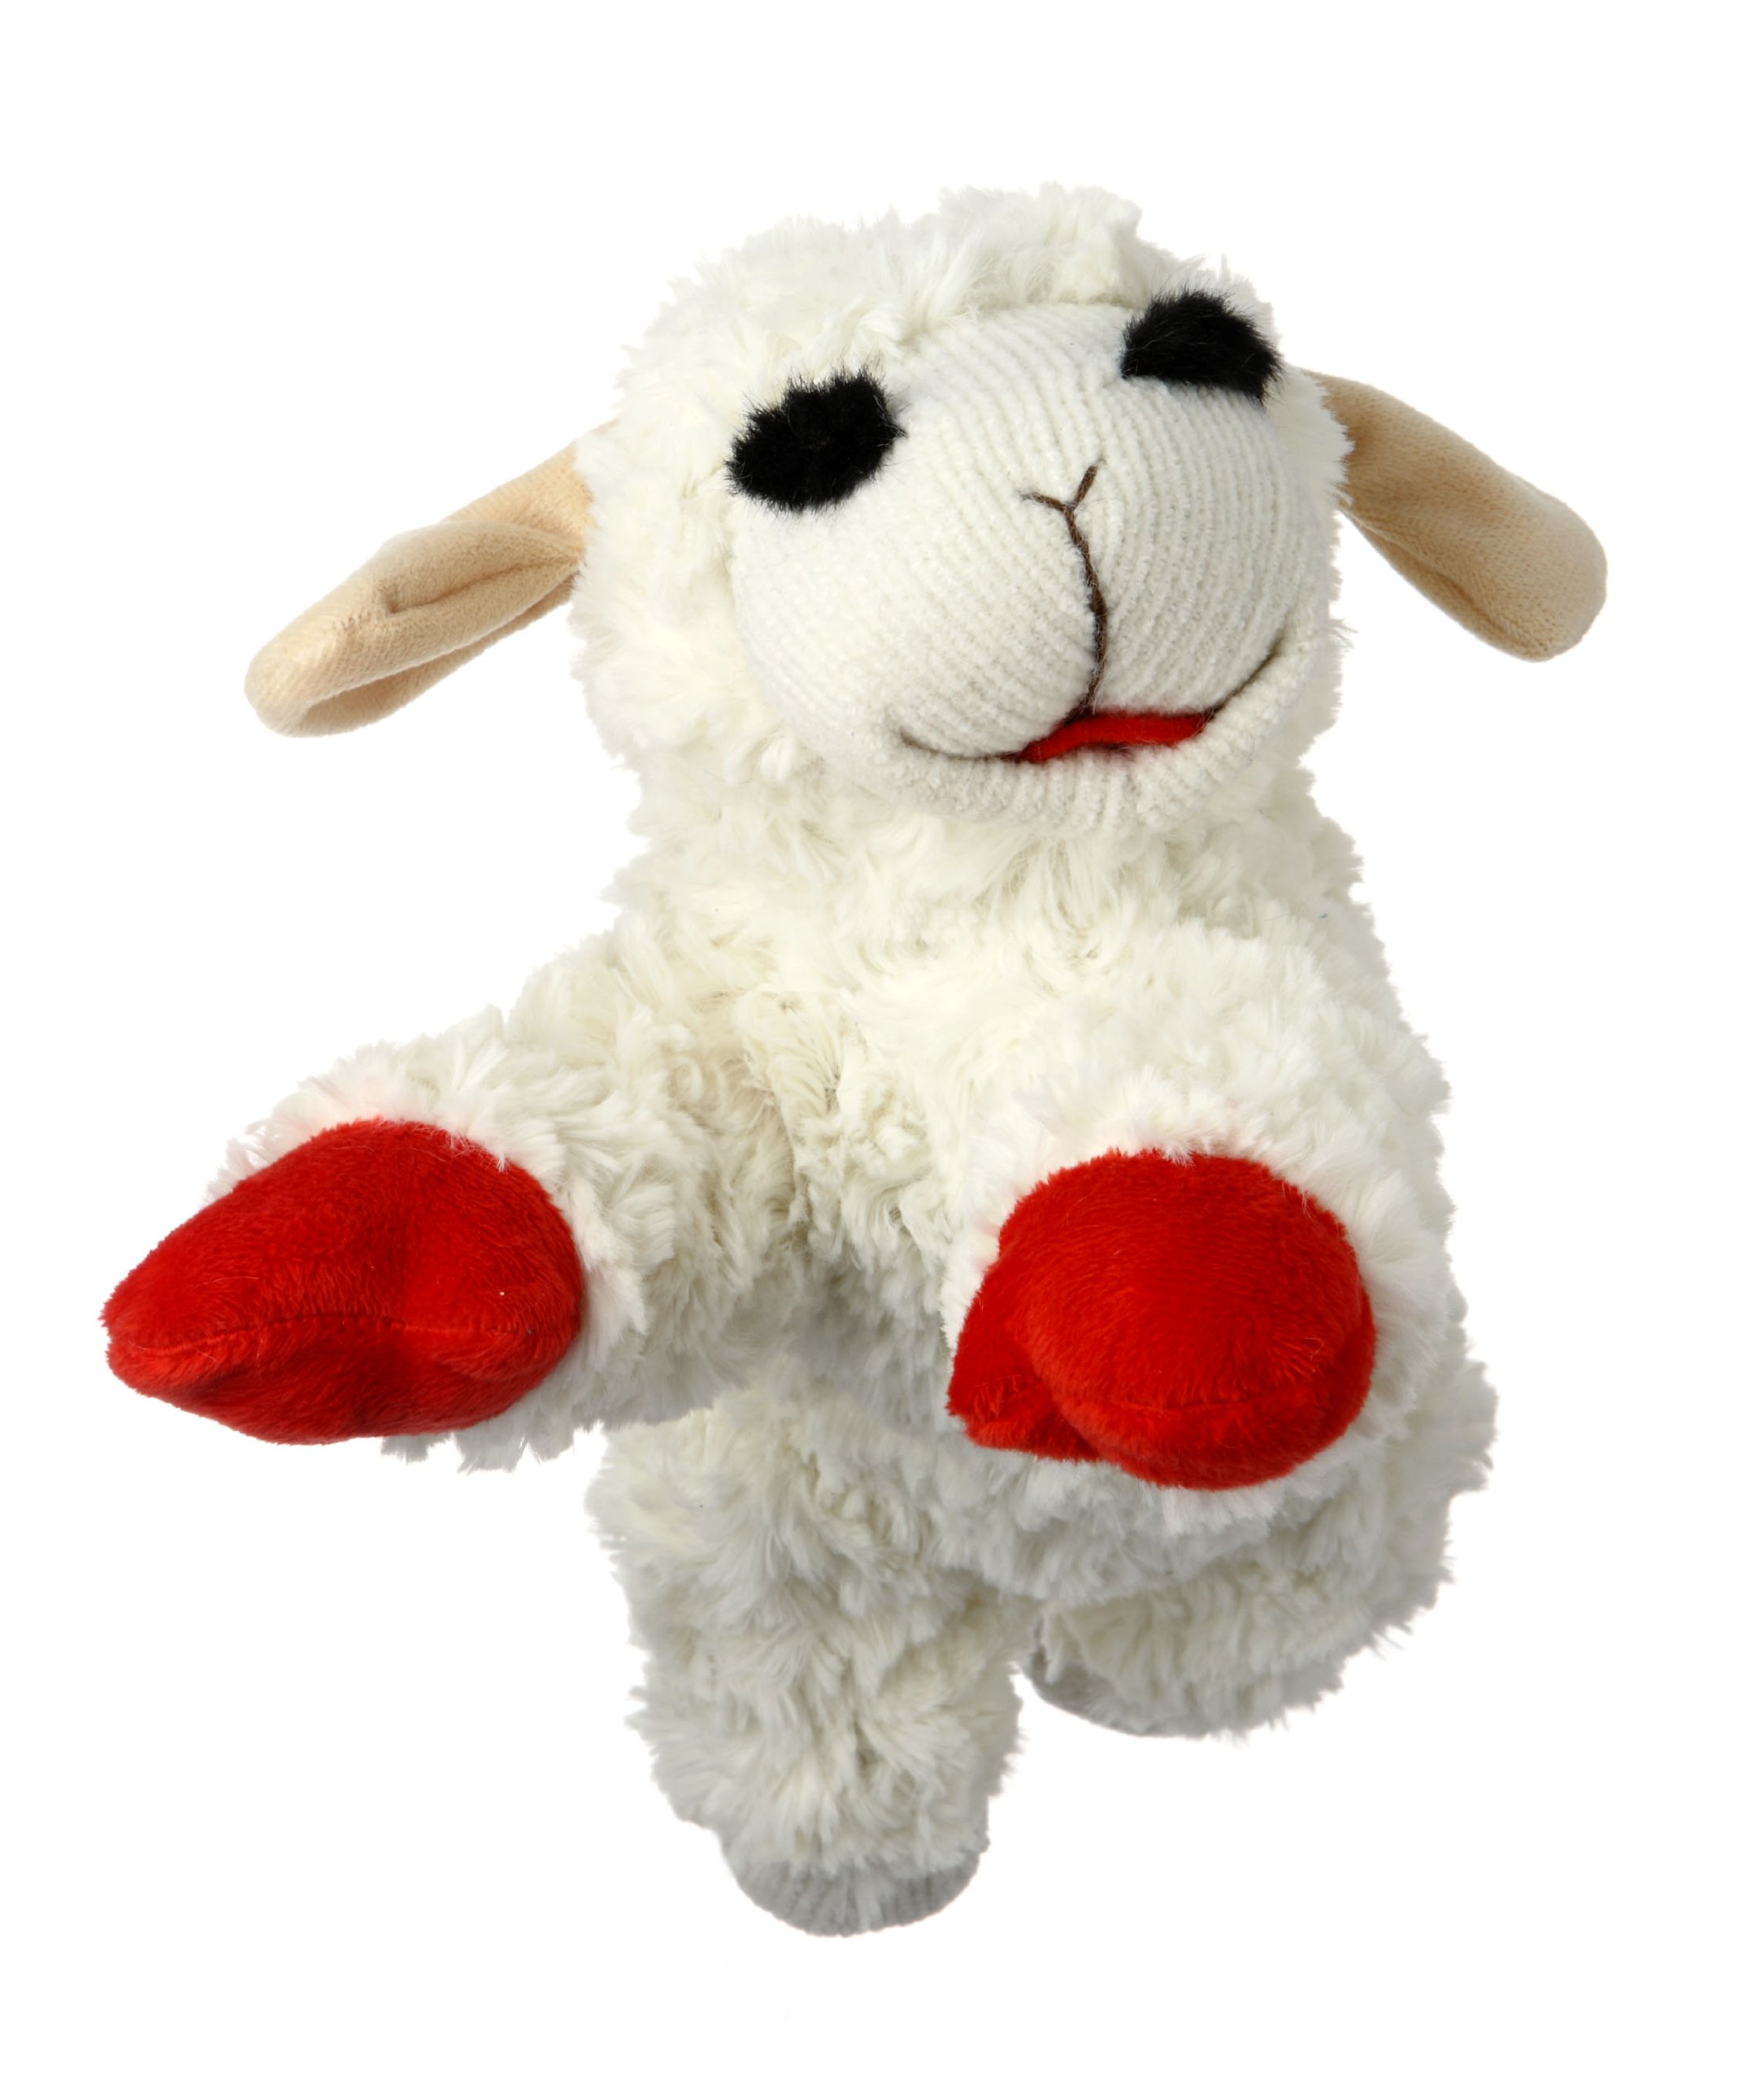 Multipet Plush Dog Toy 10" -$5 + Free Shipping w/ Prime or $25+